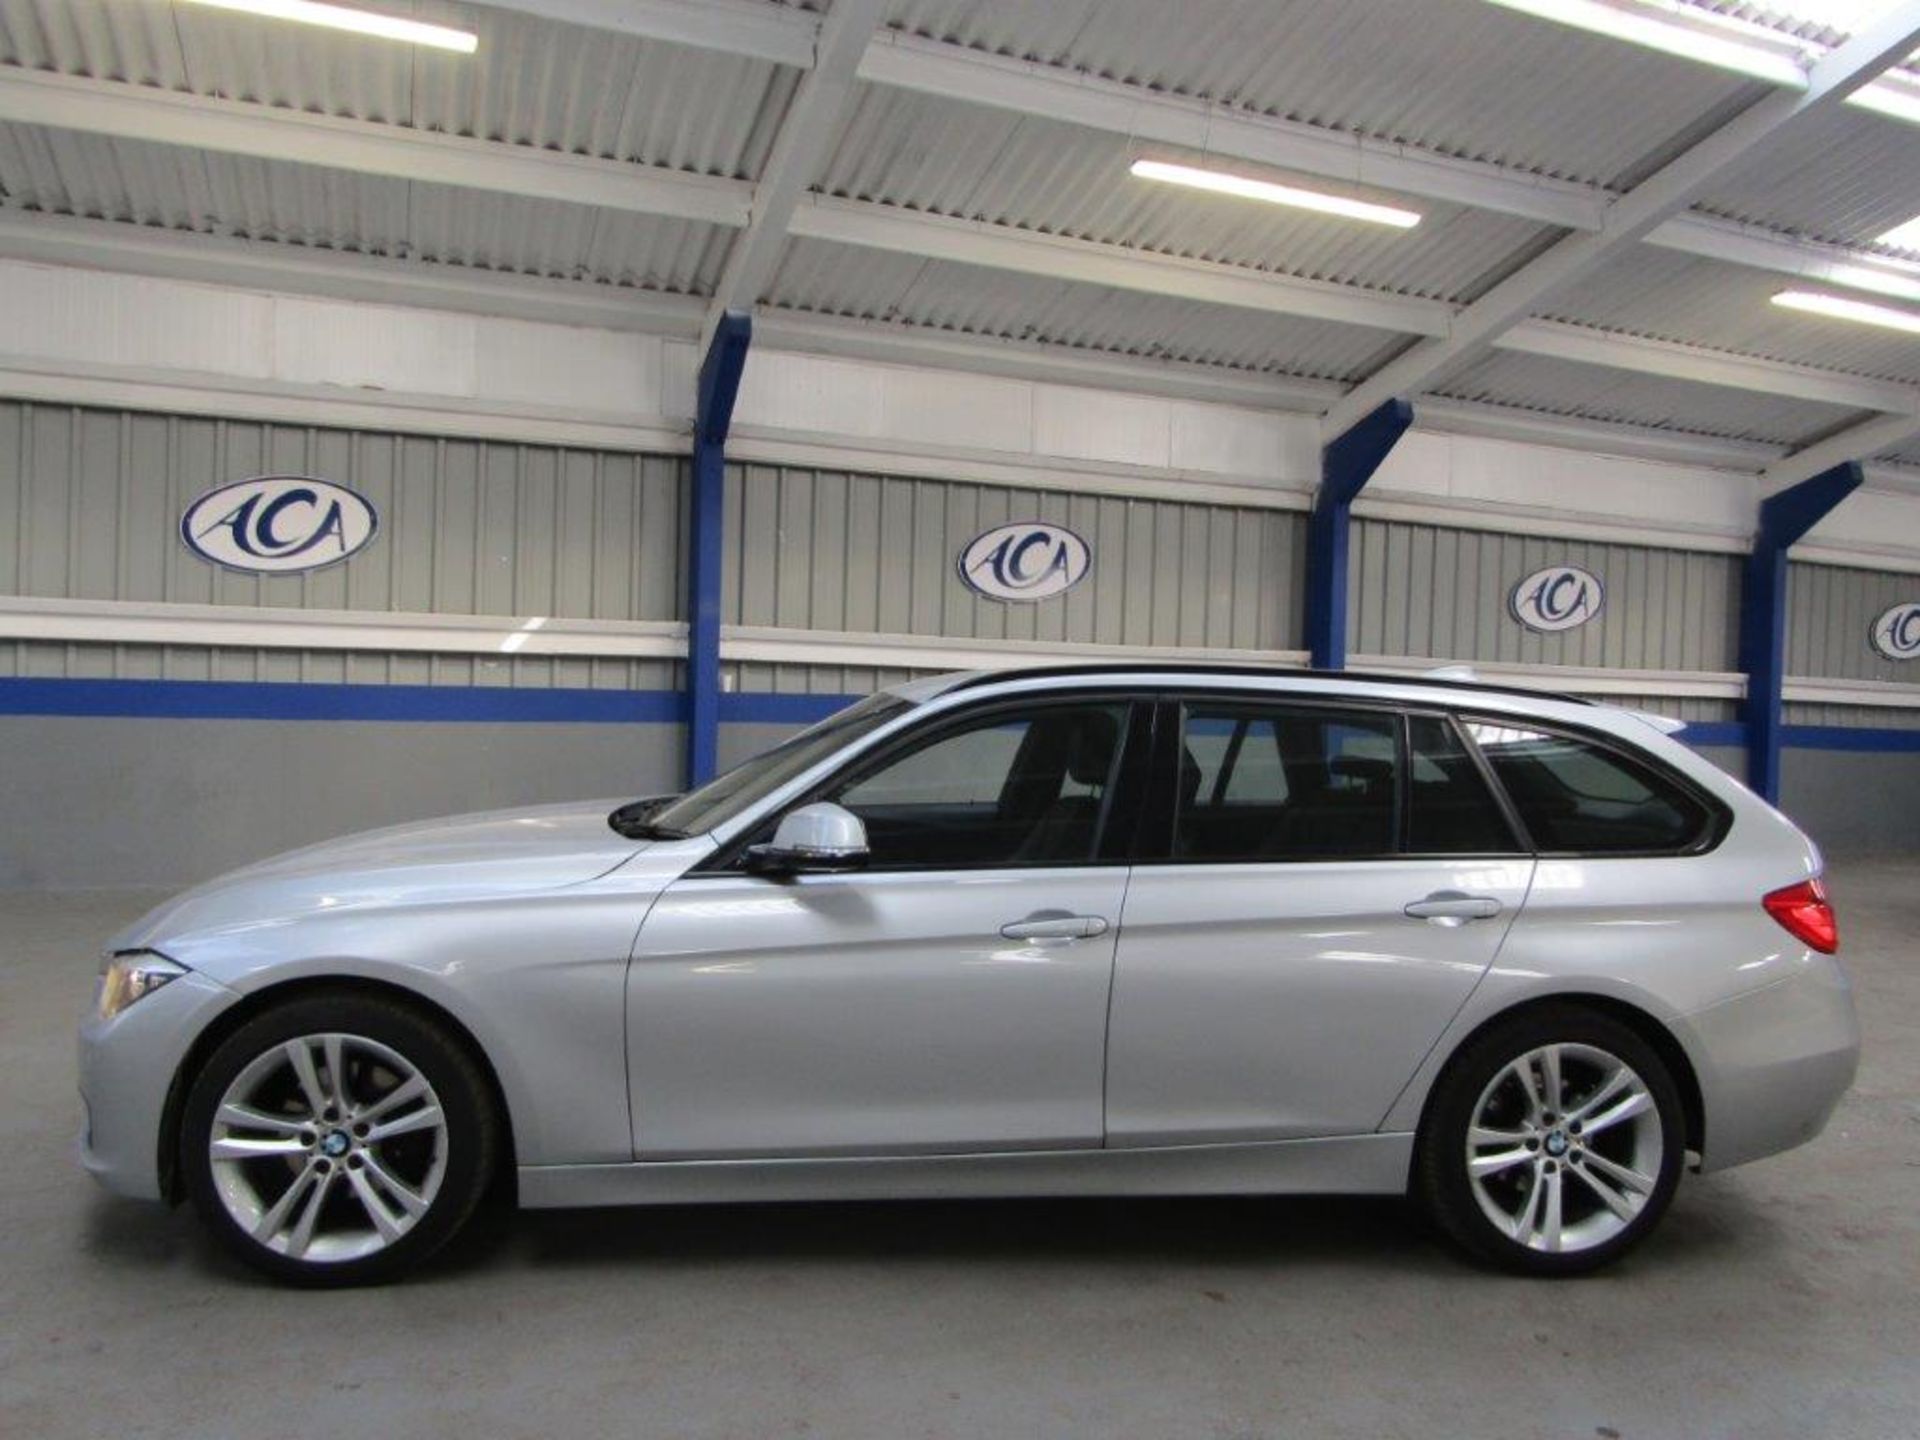 62 12 BMW 320D Sport Touring - Image 29 of 29